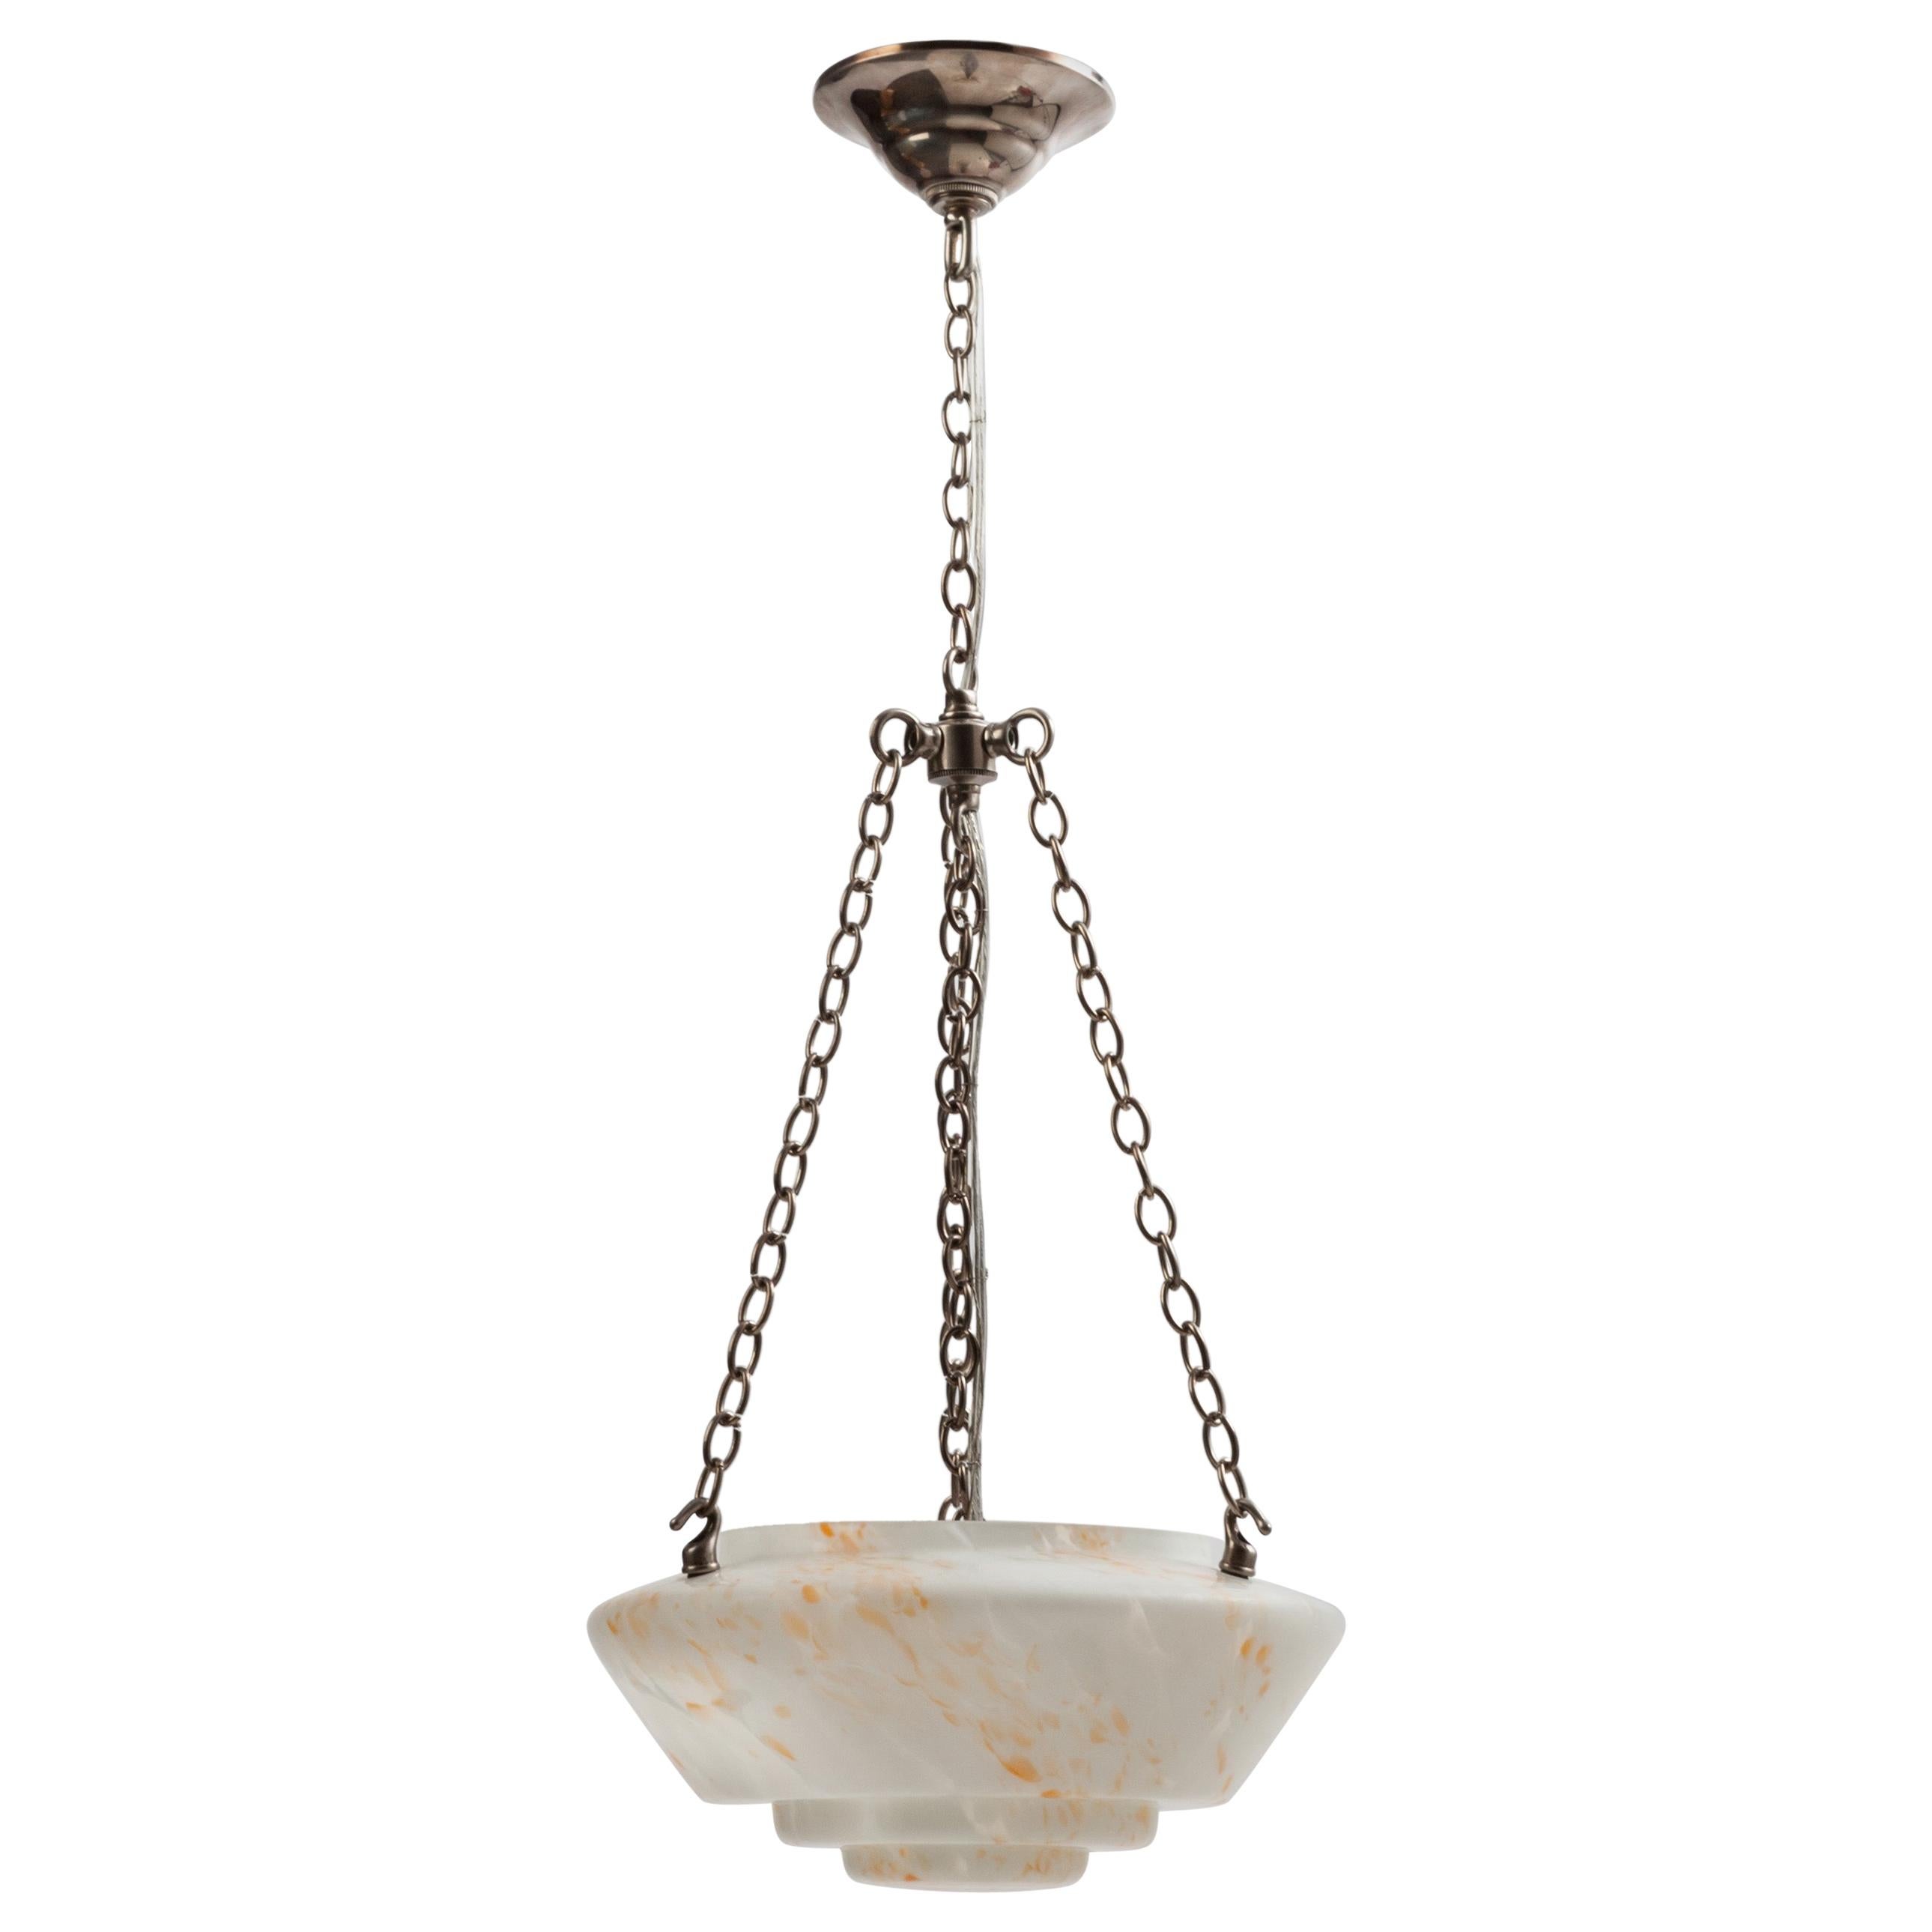 Mid-Century Modern End-Of-Day Art Glass and Nickel Pendant Light, Circa 1950s